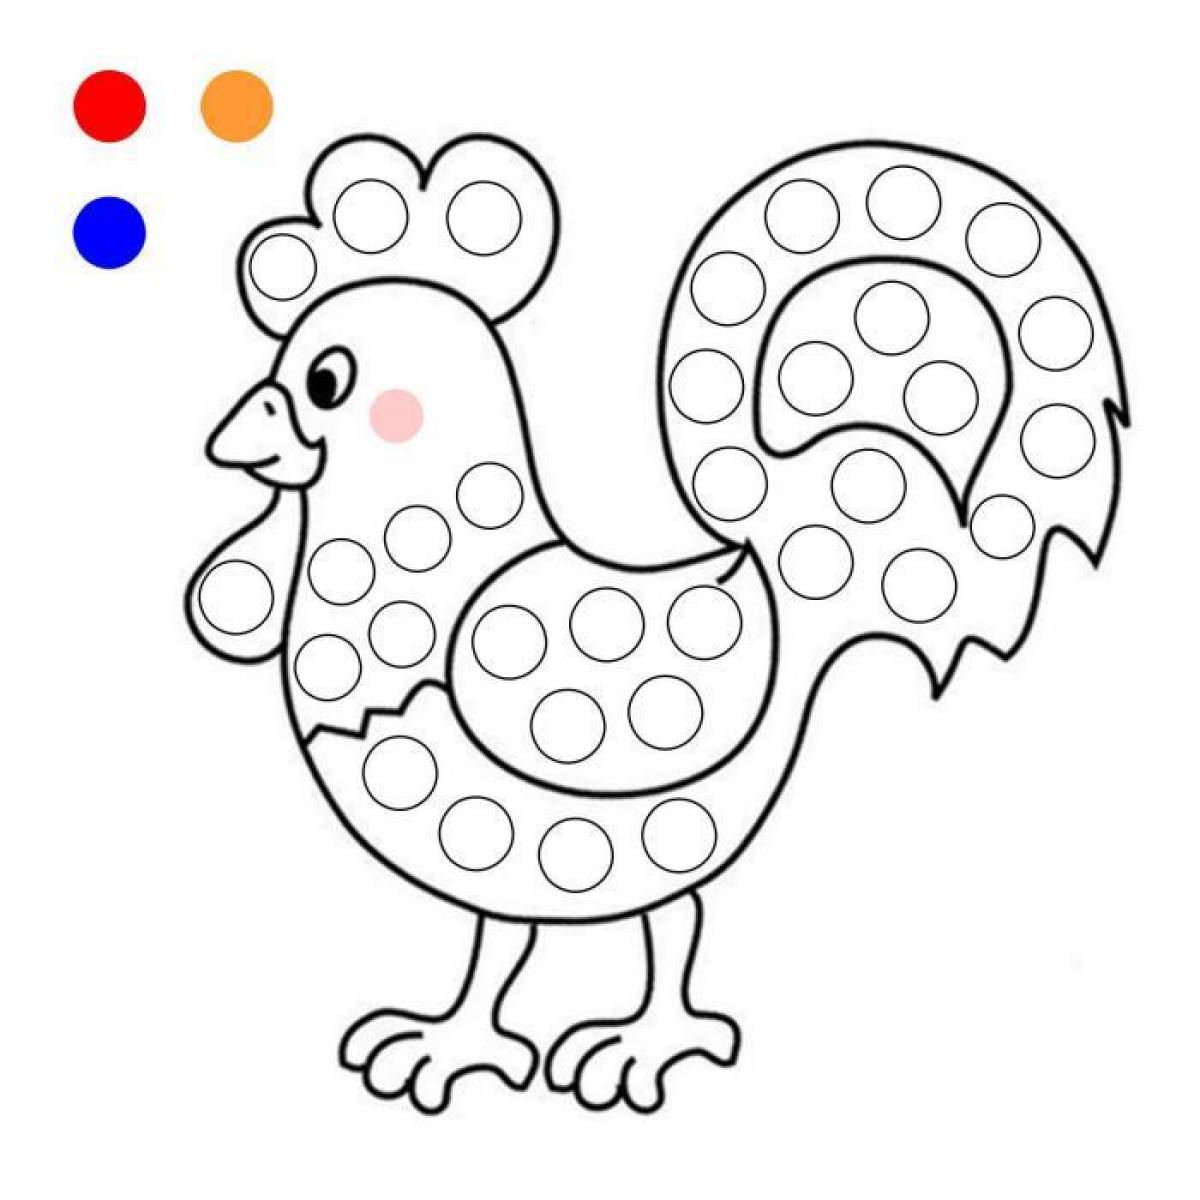 Coloring pages for fingers rooster